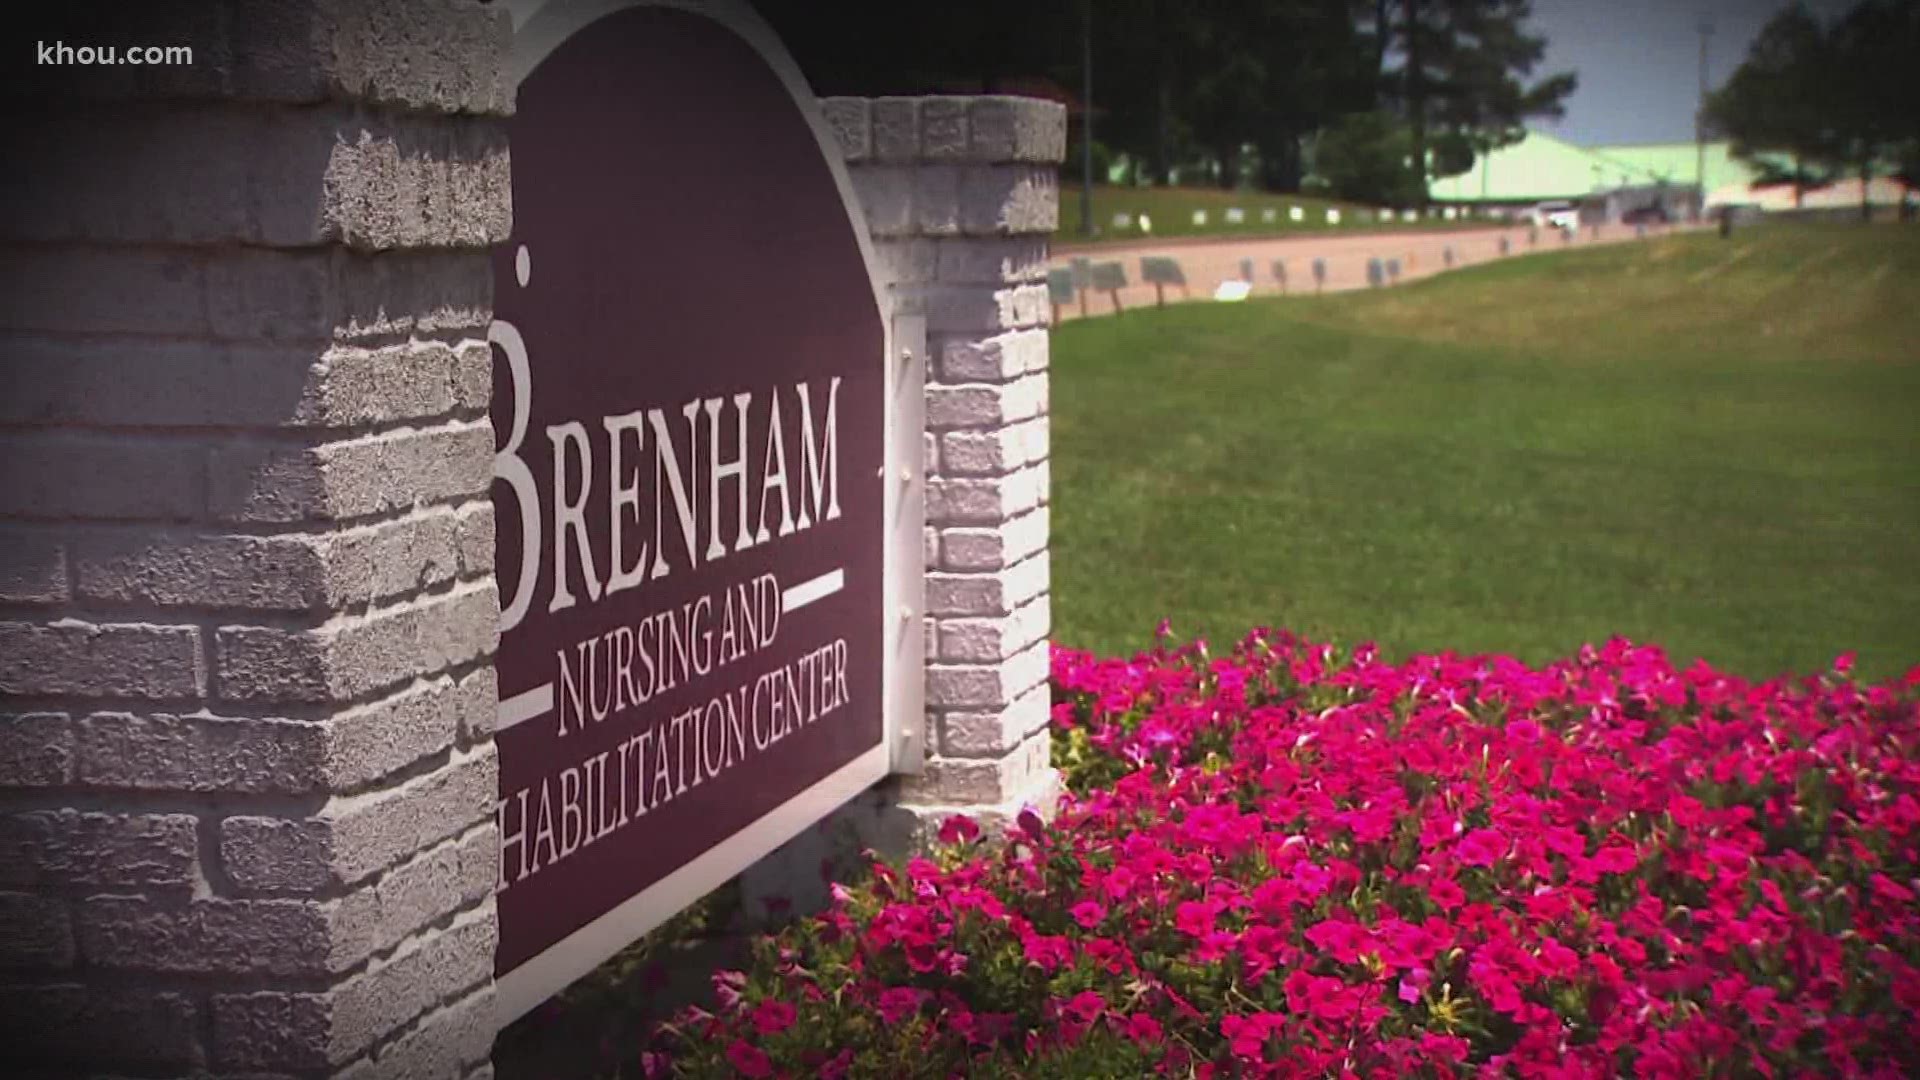 Public health officials fear there will be more deaths at the Brenham Nursing and Rehabilitation Center.